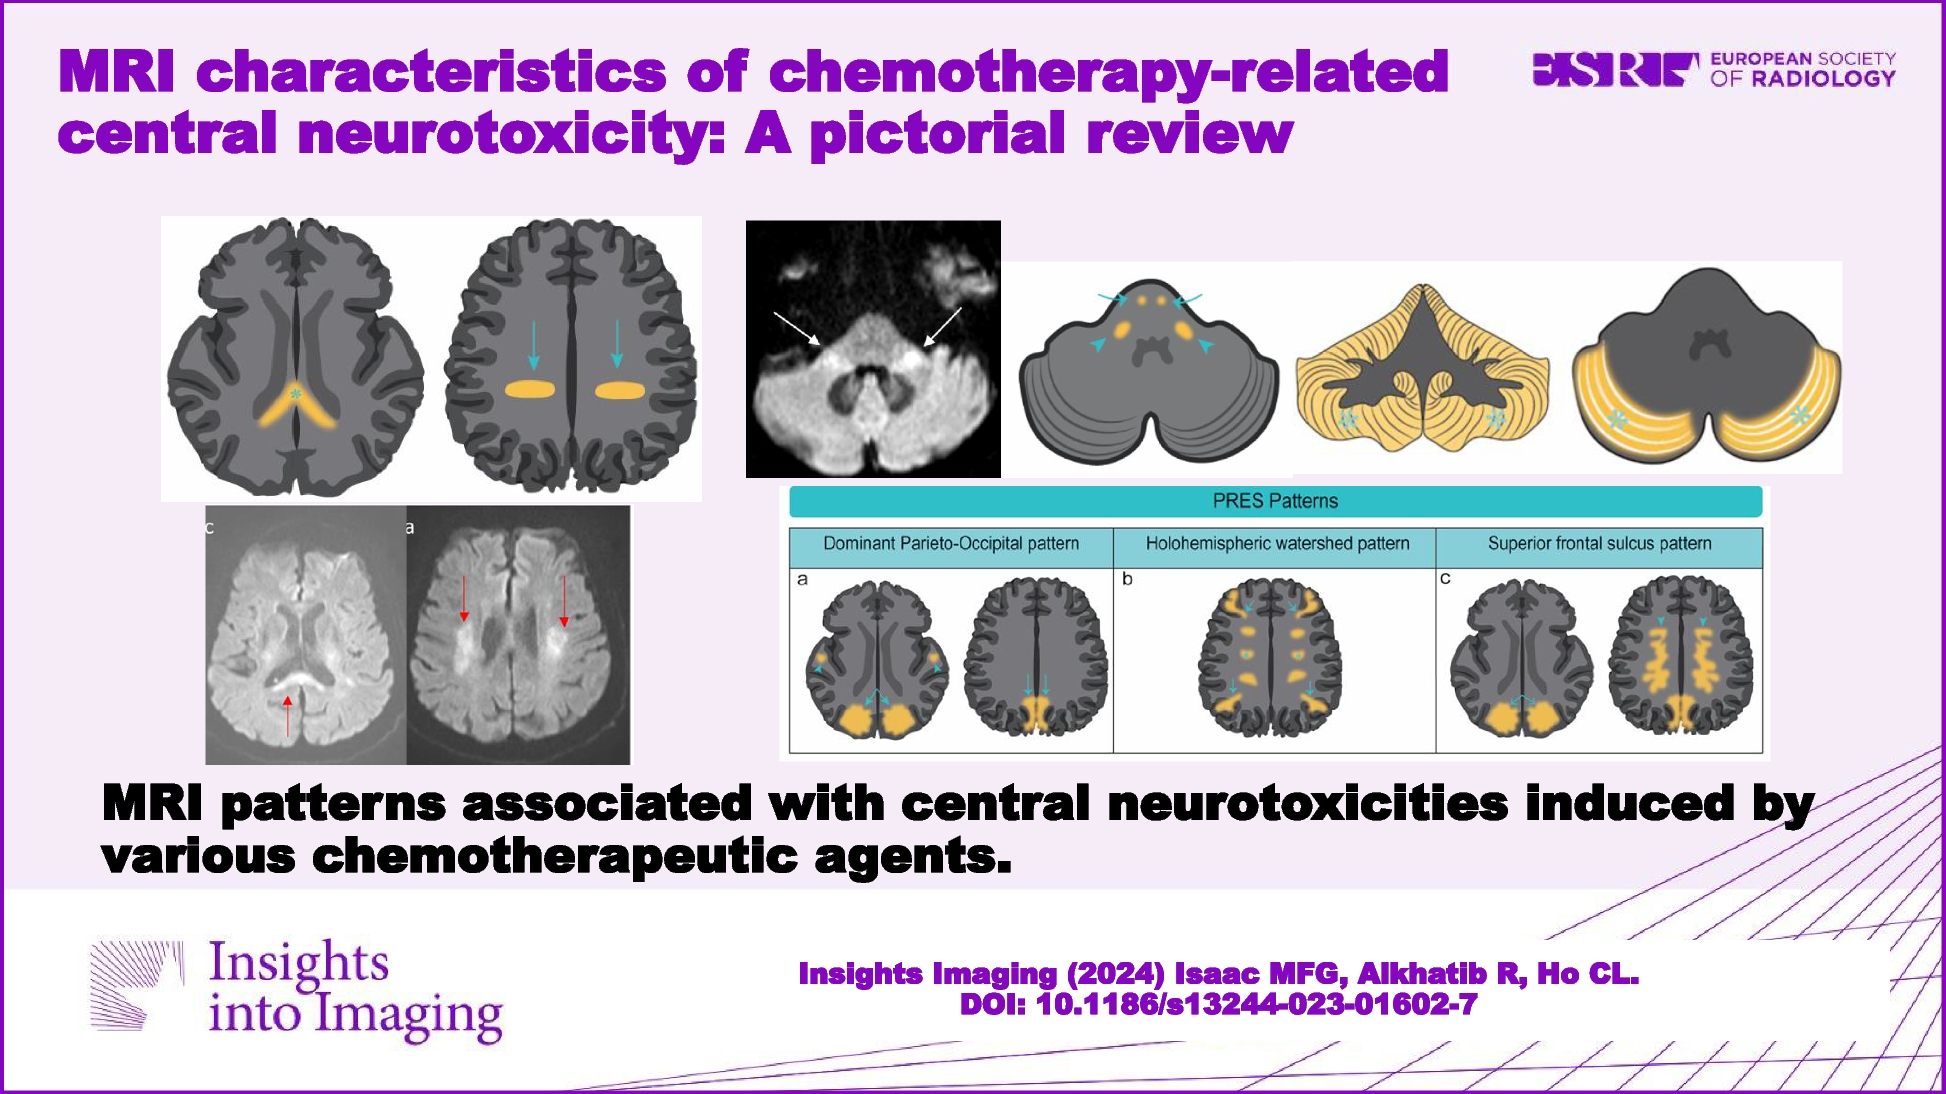 MRI characteristics of chemotherapy-related central neurotoxicity: a pictorial review